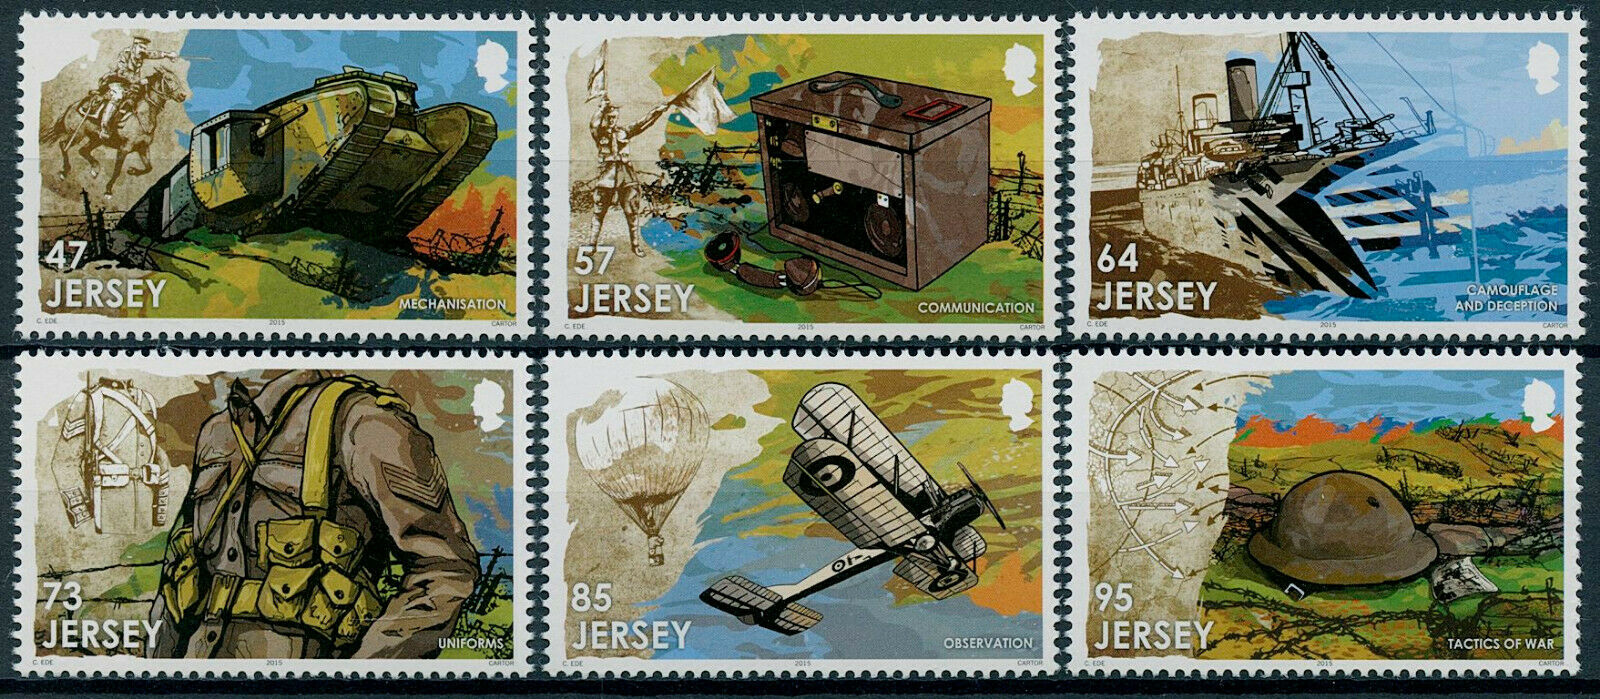 Jersey 2015 MNH Military Stamps WWI WW1 Great War Centenary Change 6v Set